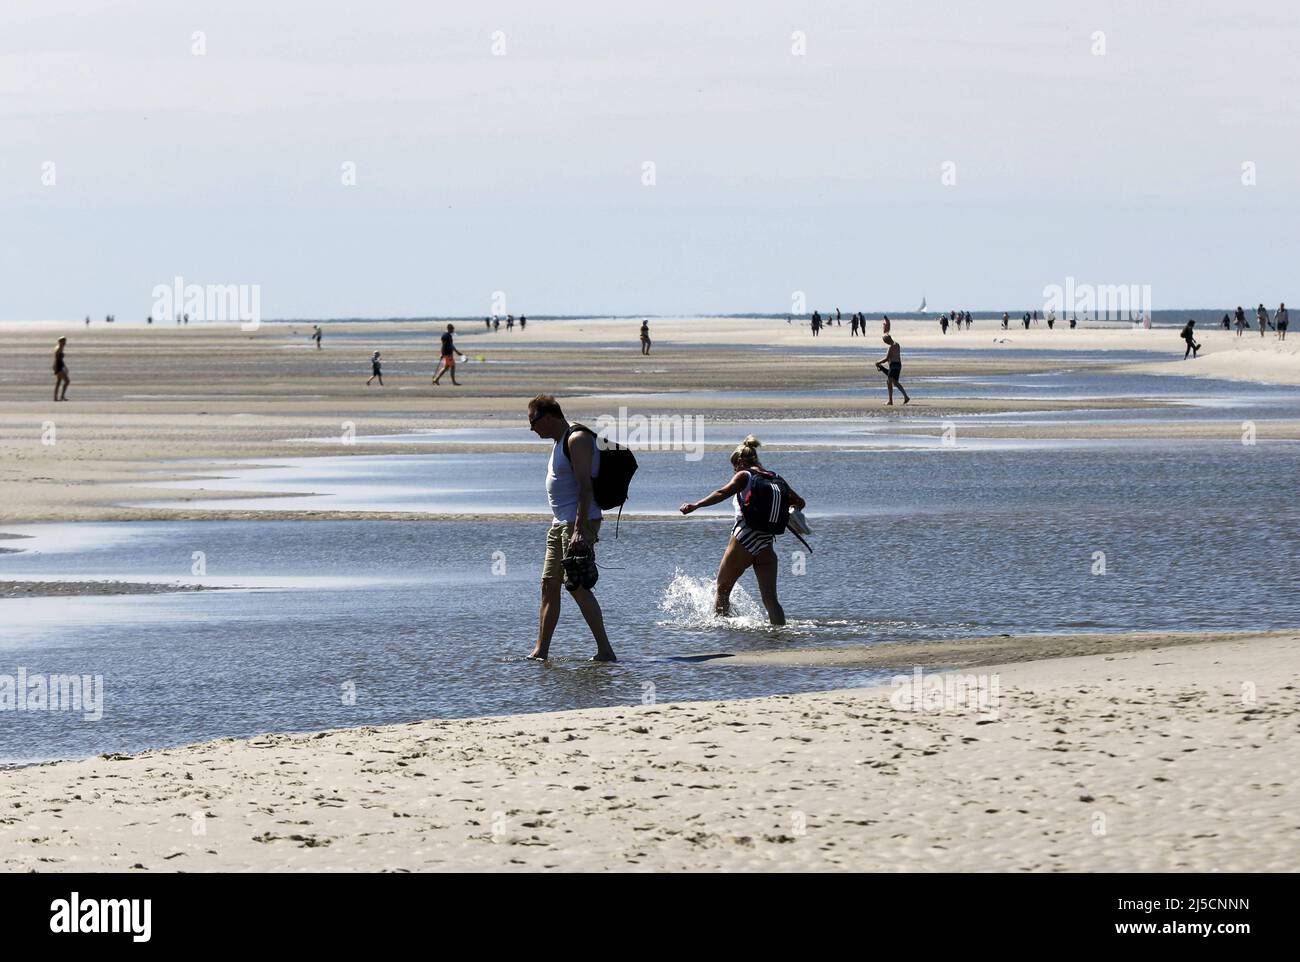 Holidaymakers on the beach on the island of Amrum. In Schleswig-Holstein, numerous relaxations in the Corona crisis have come into force. After the end of the lockdown, vacationers are allowed to travel to the North Frisian islands again. [automated translation] Stock Photo